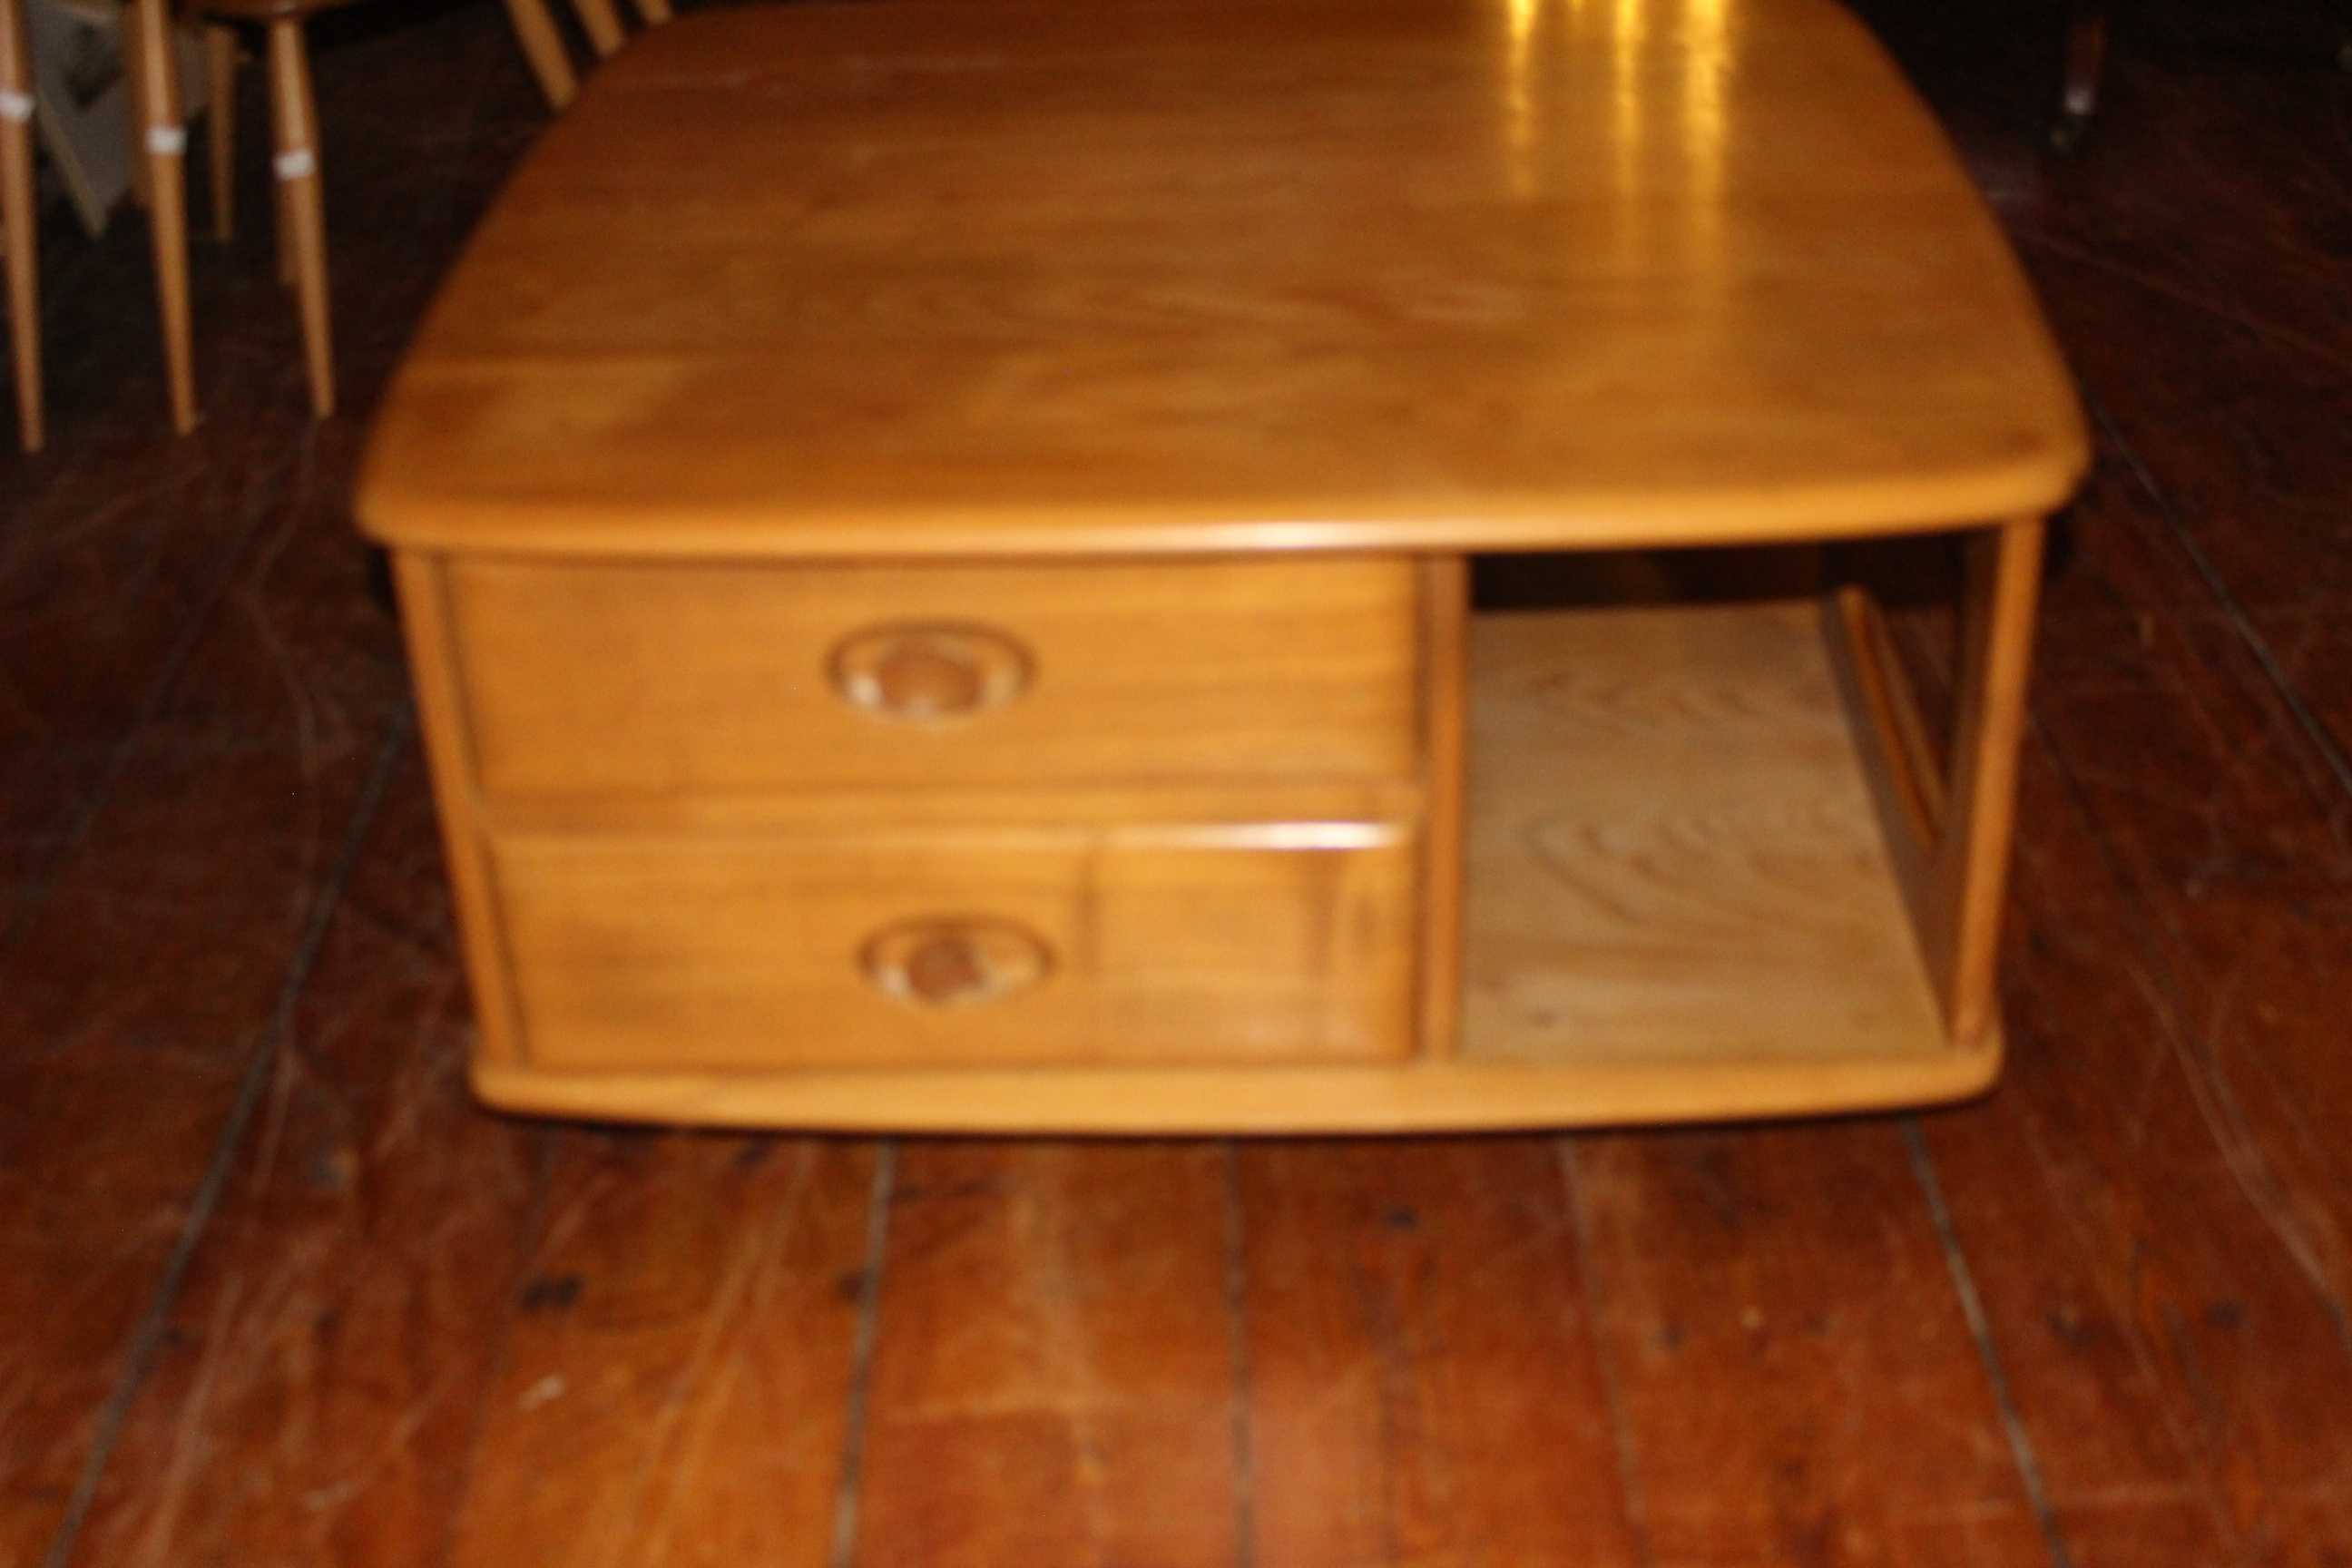 Ercol Pandoras box TV table very good used condition but one the draw knobs is broken. - Image 2 of 5